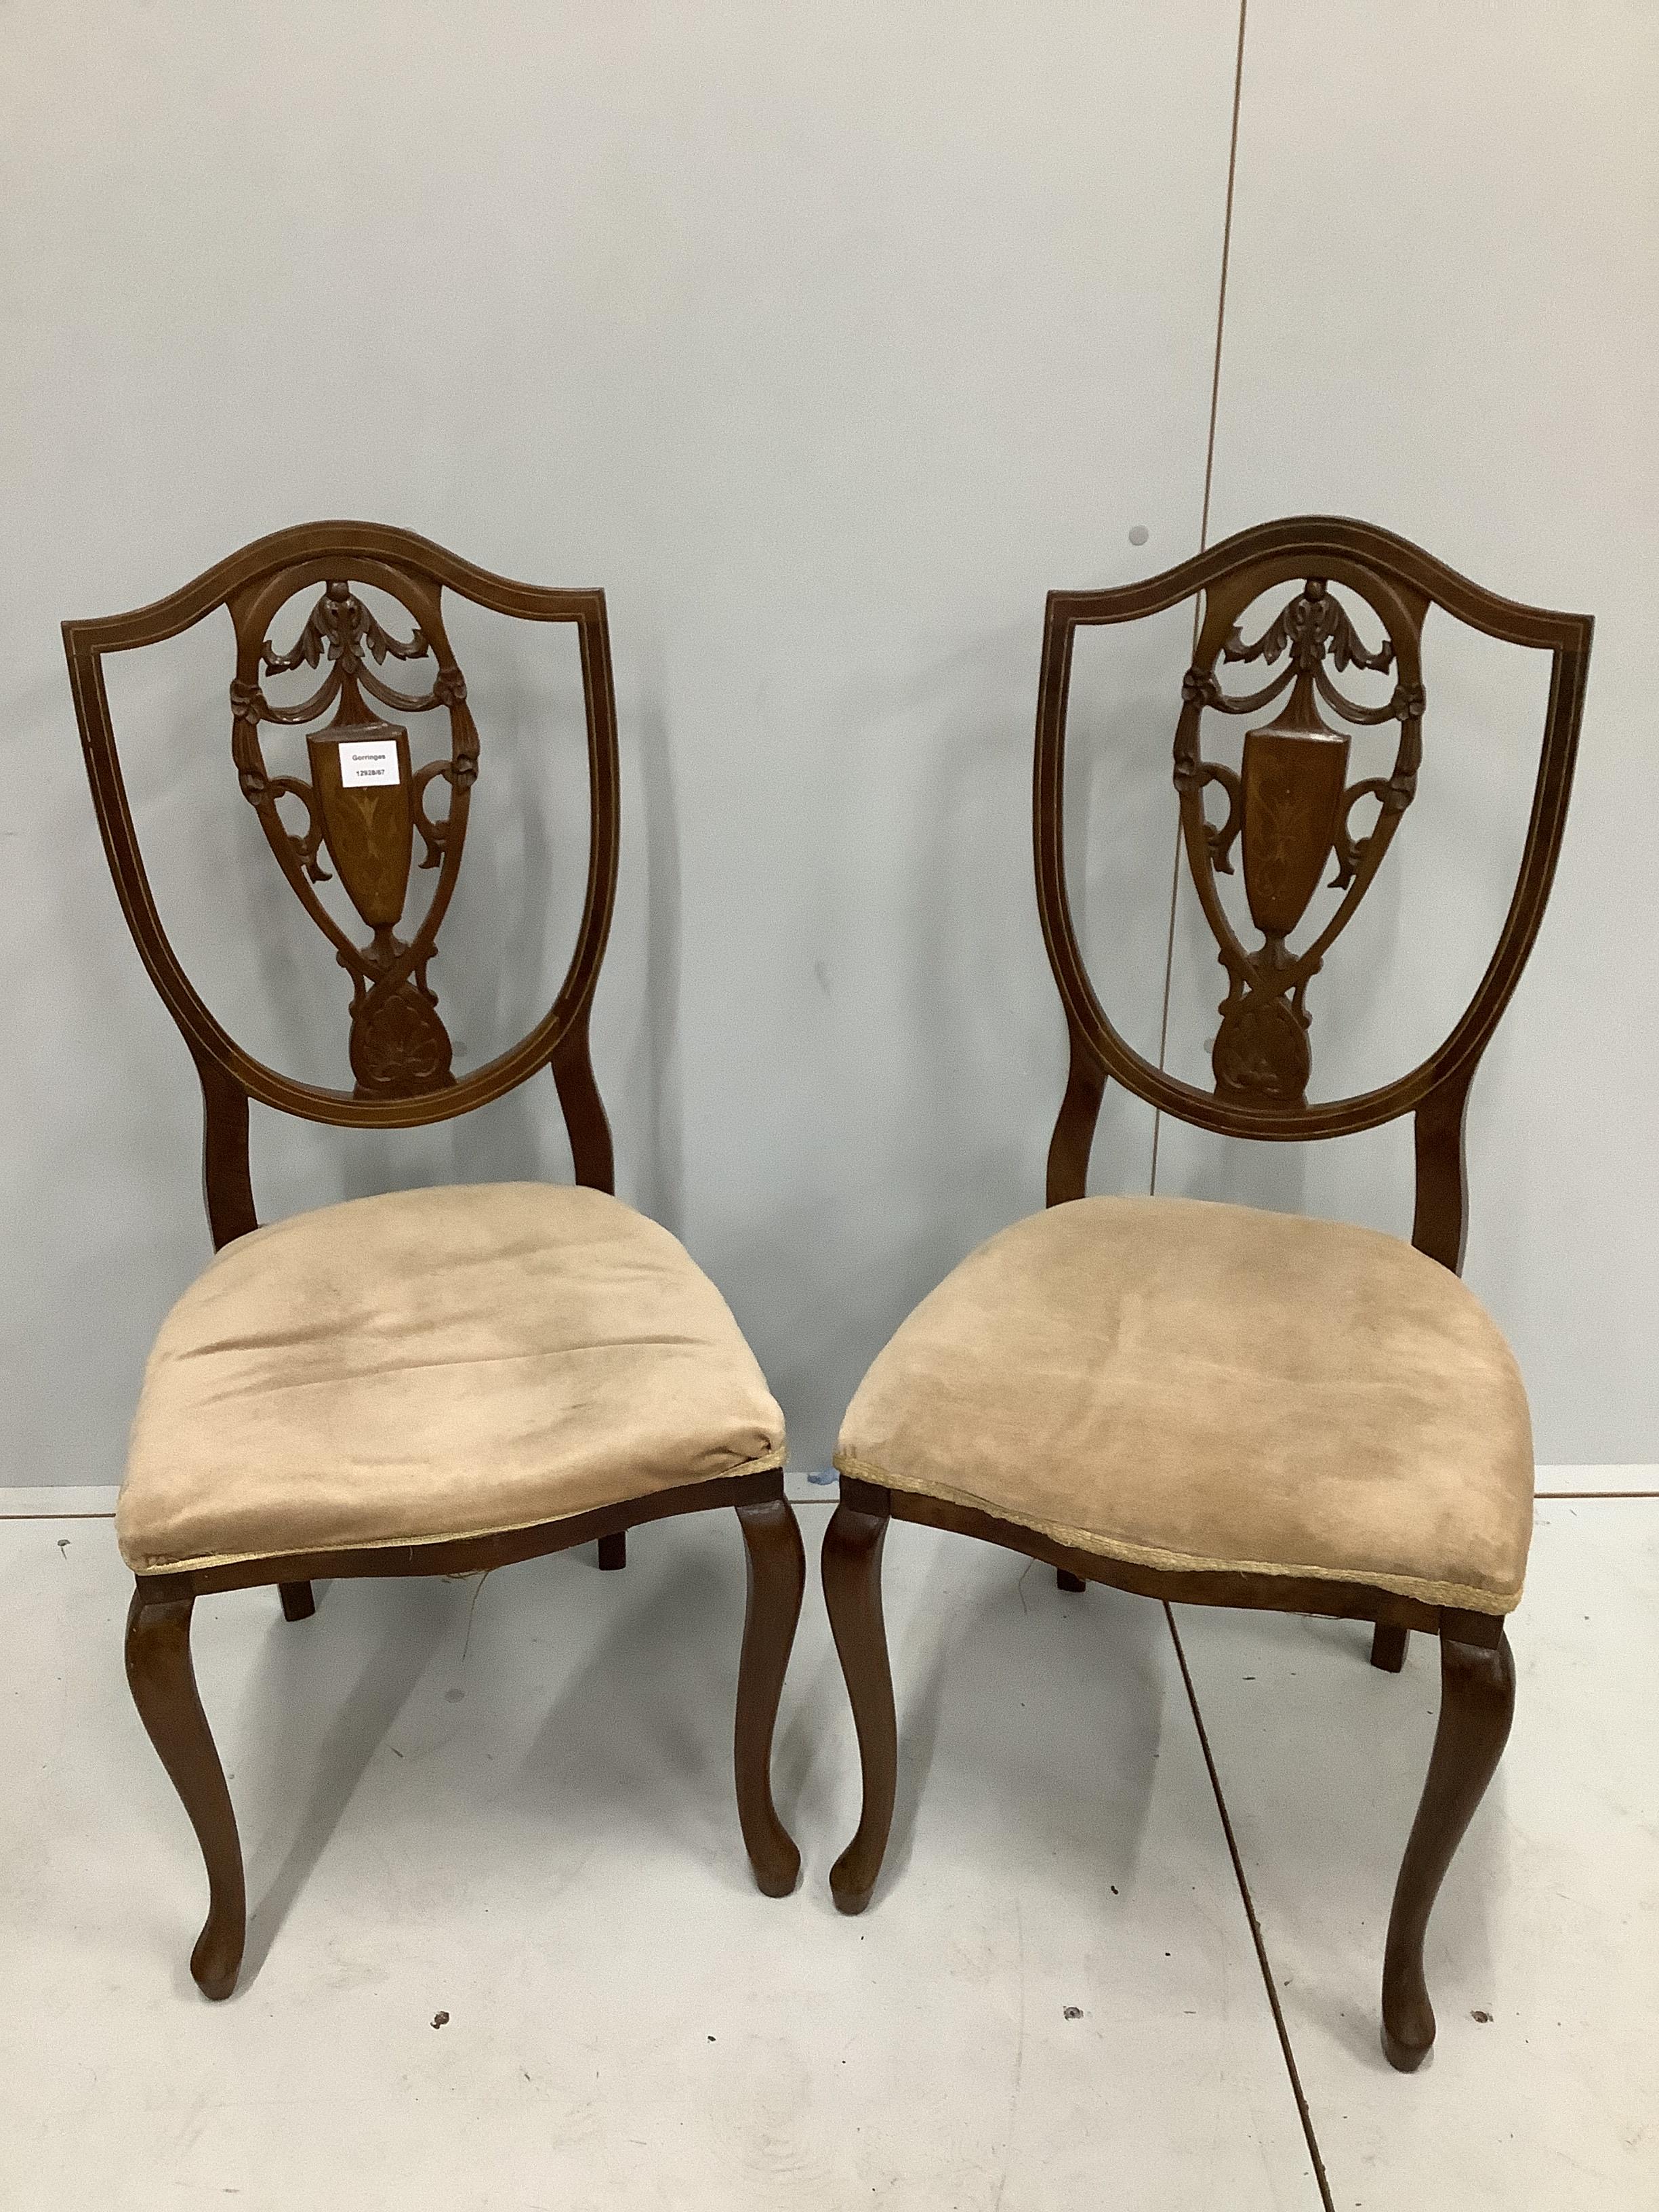 A pair of Edwardian inlaid mahogany shield back side chairs